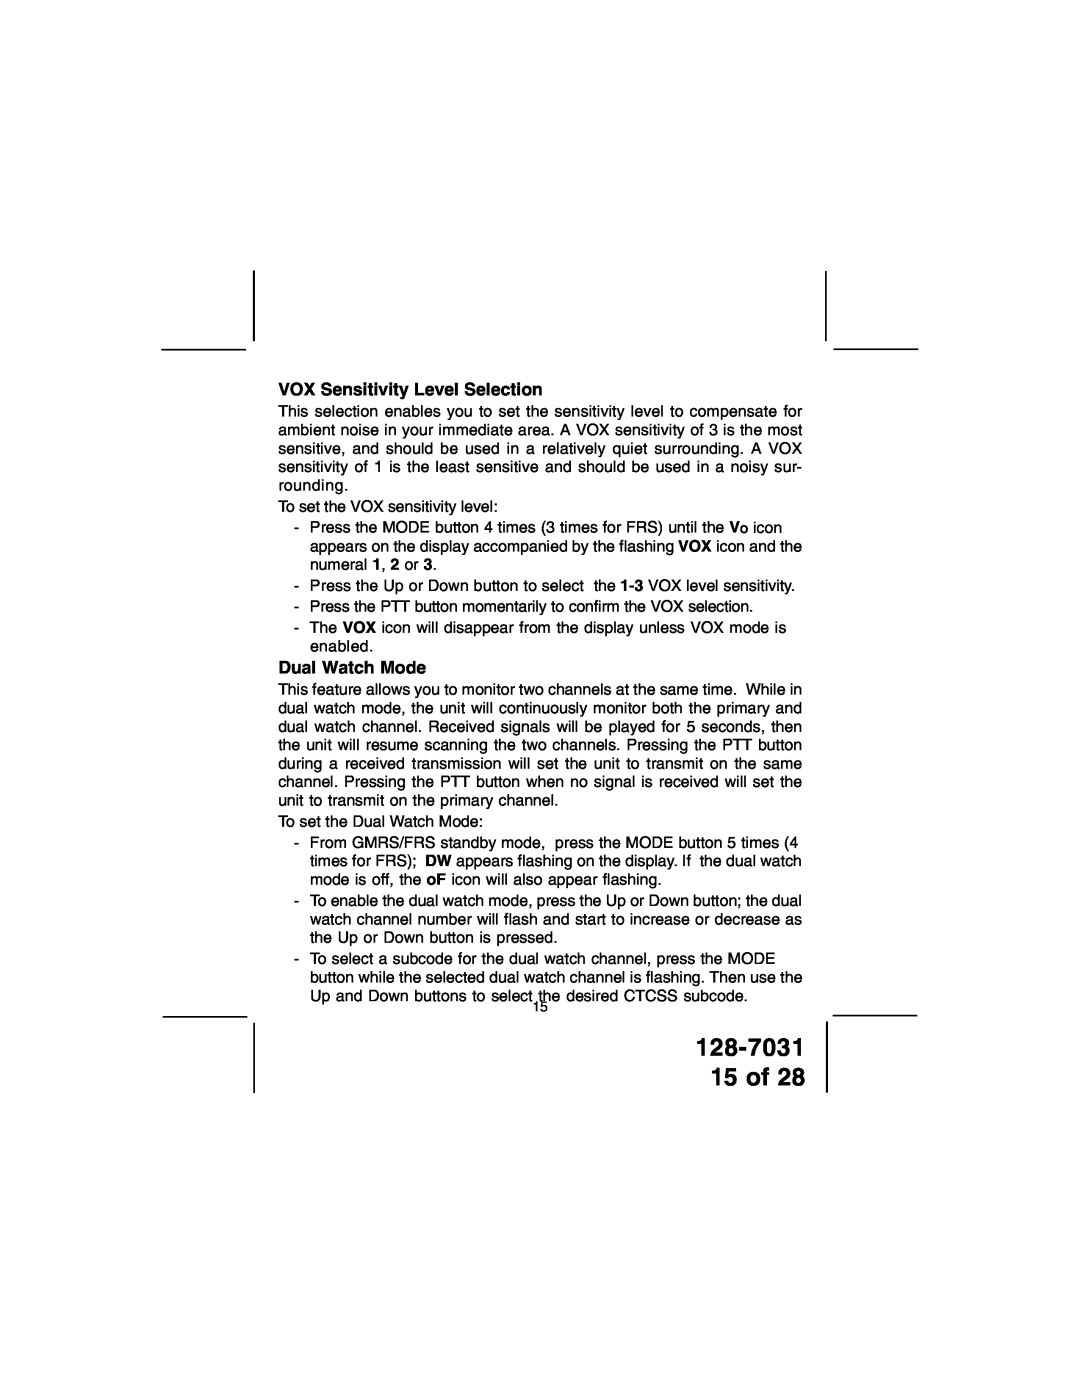 Audiovox owner manual 128-7031 15 of, VOX Sensitivity Level Selection, Dual Watch Mode 